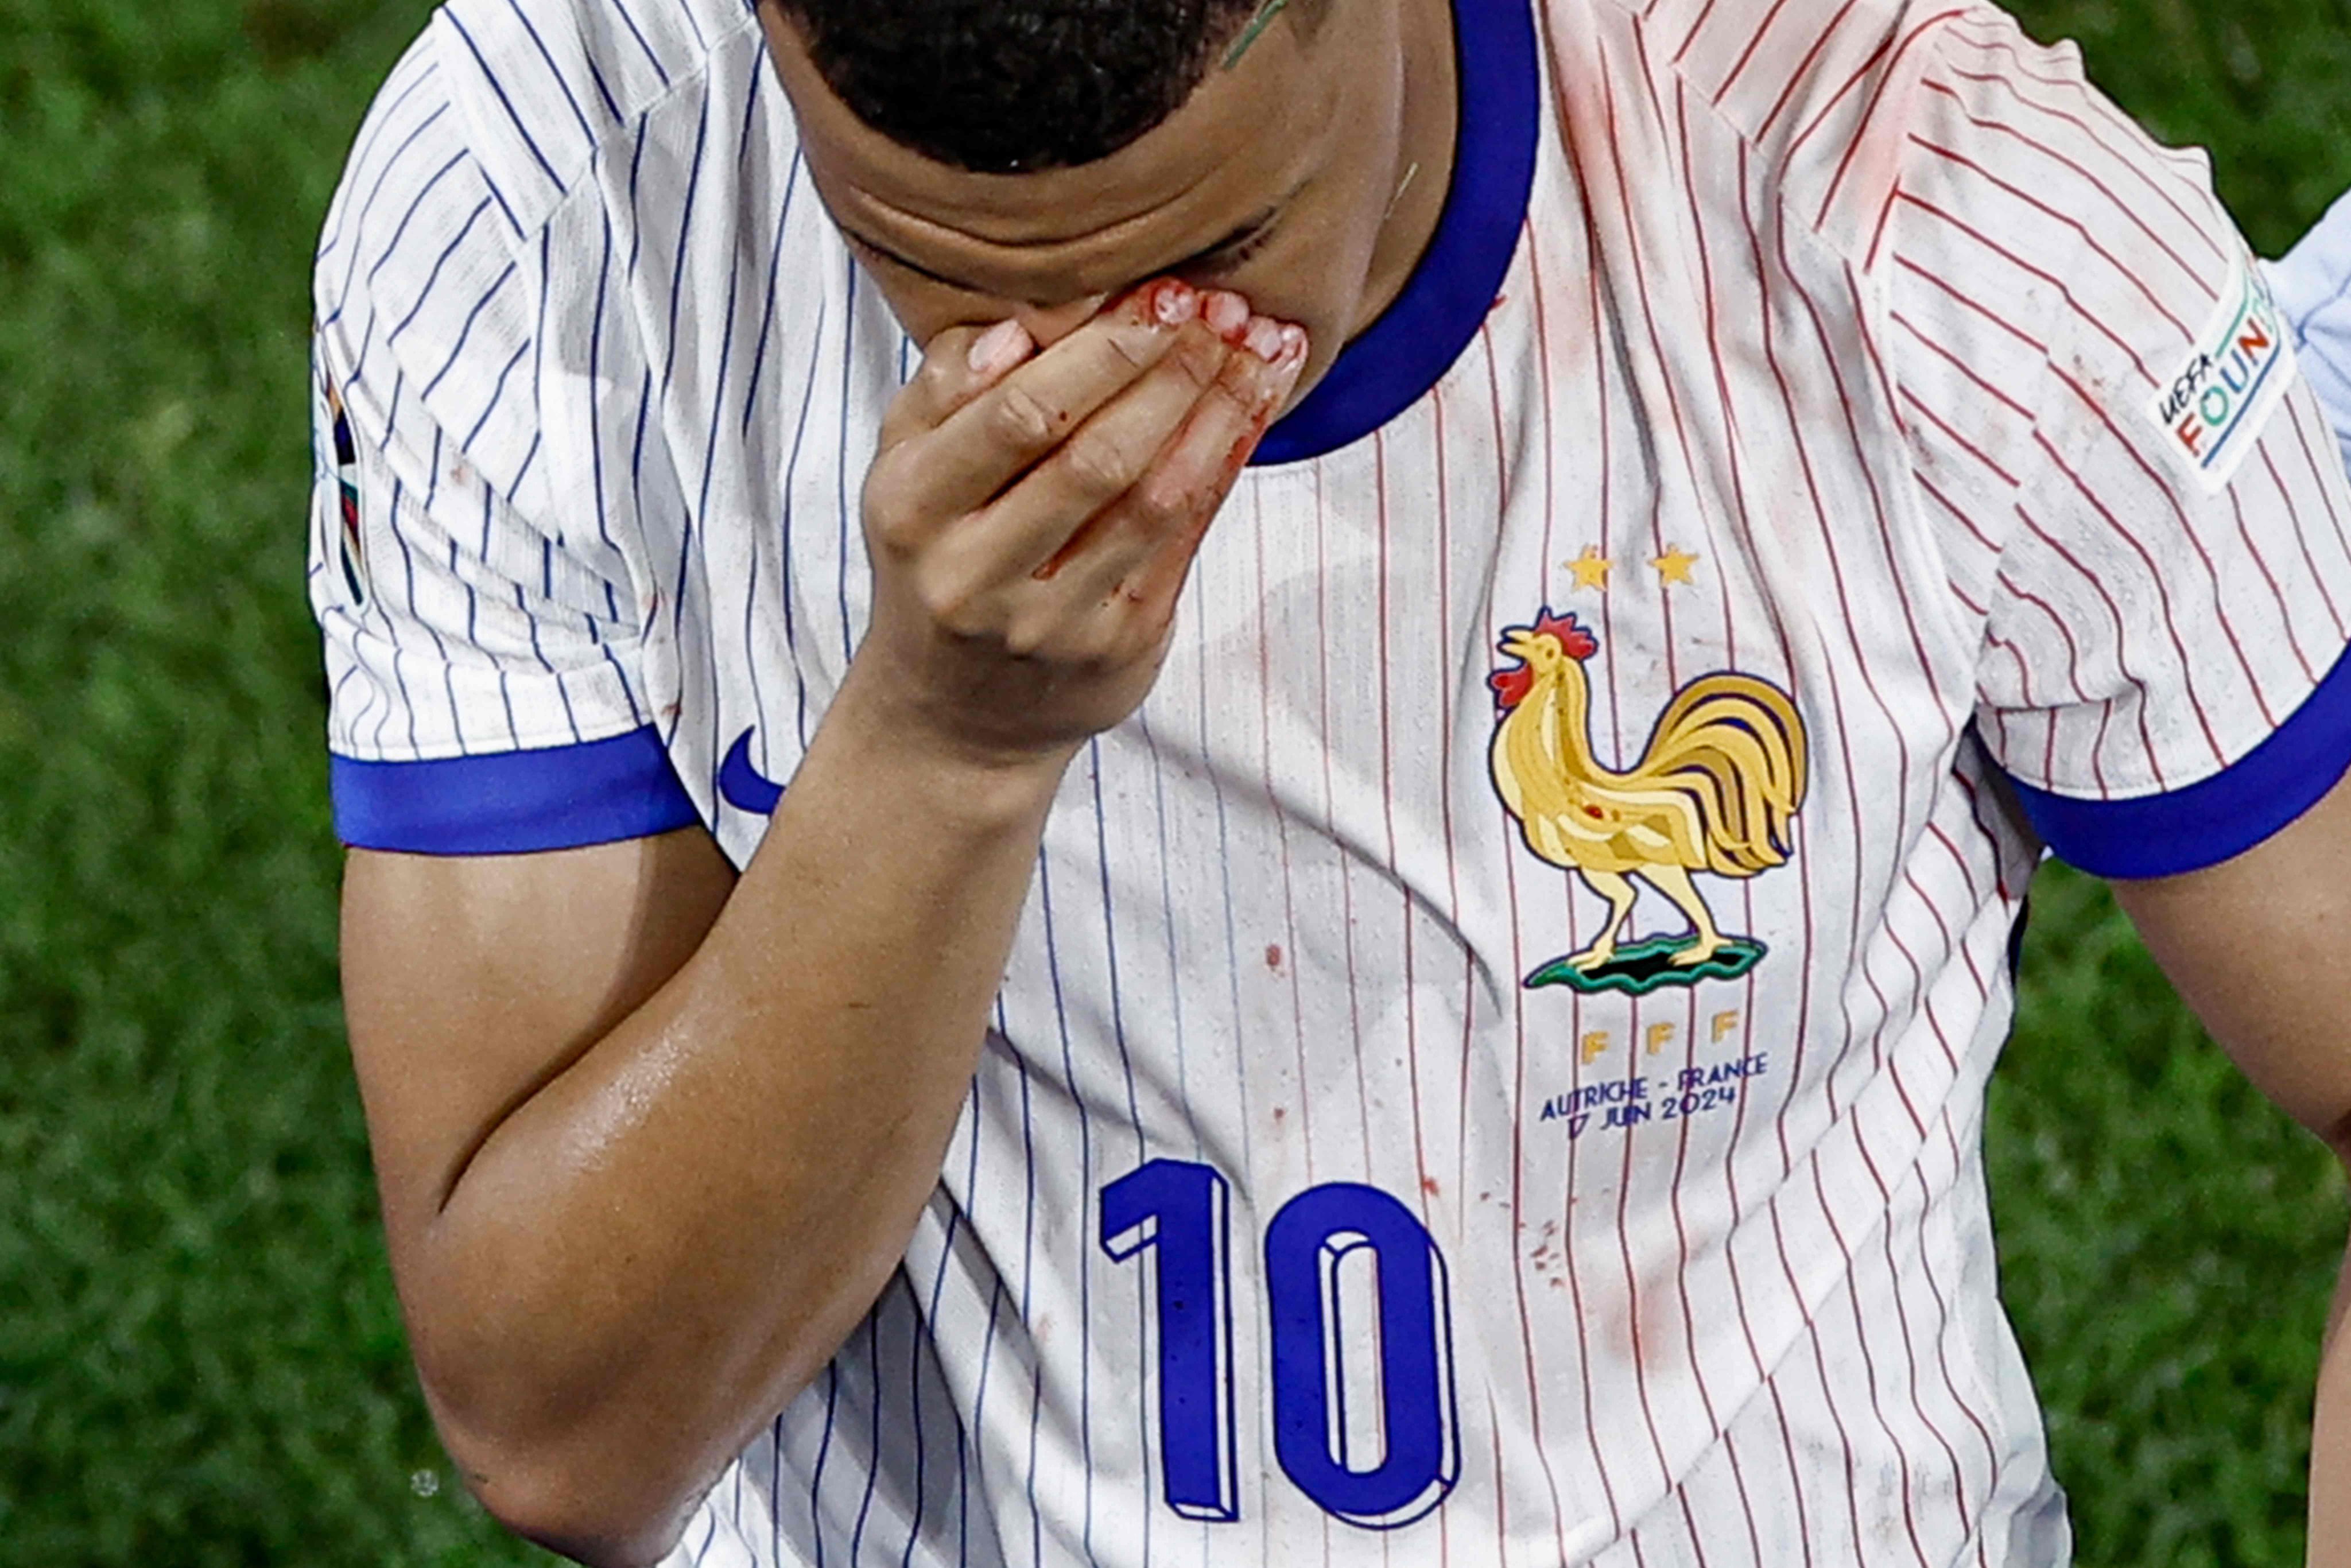 France’s Kylian Mbappe leaves the pitch after breaking his nose in a collision during the Group D match against Austria in Duesseldorf on Monday. Photo: AFP